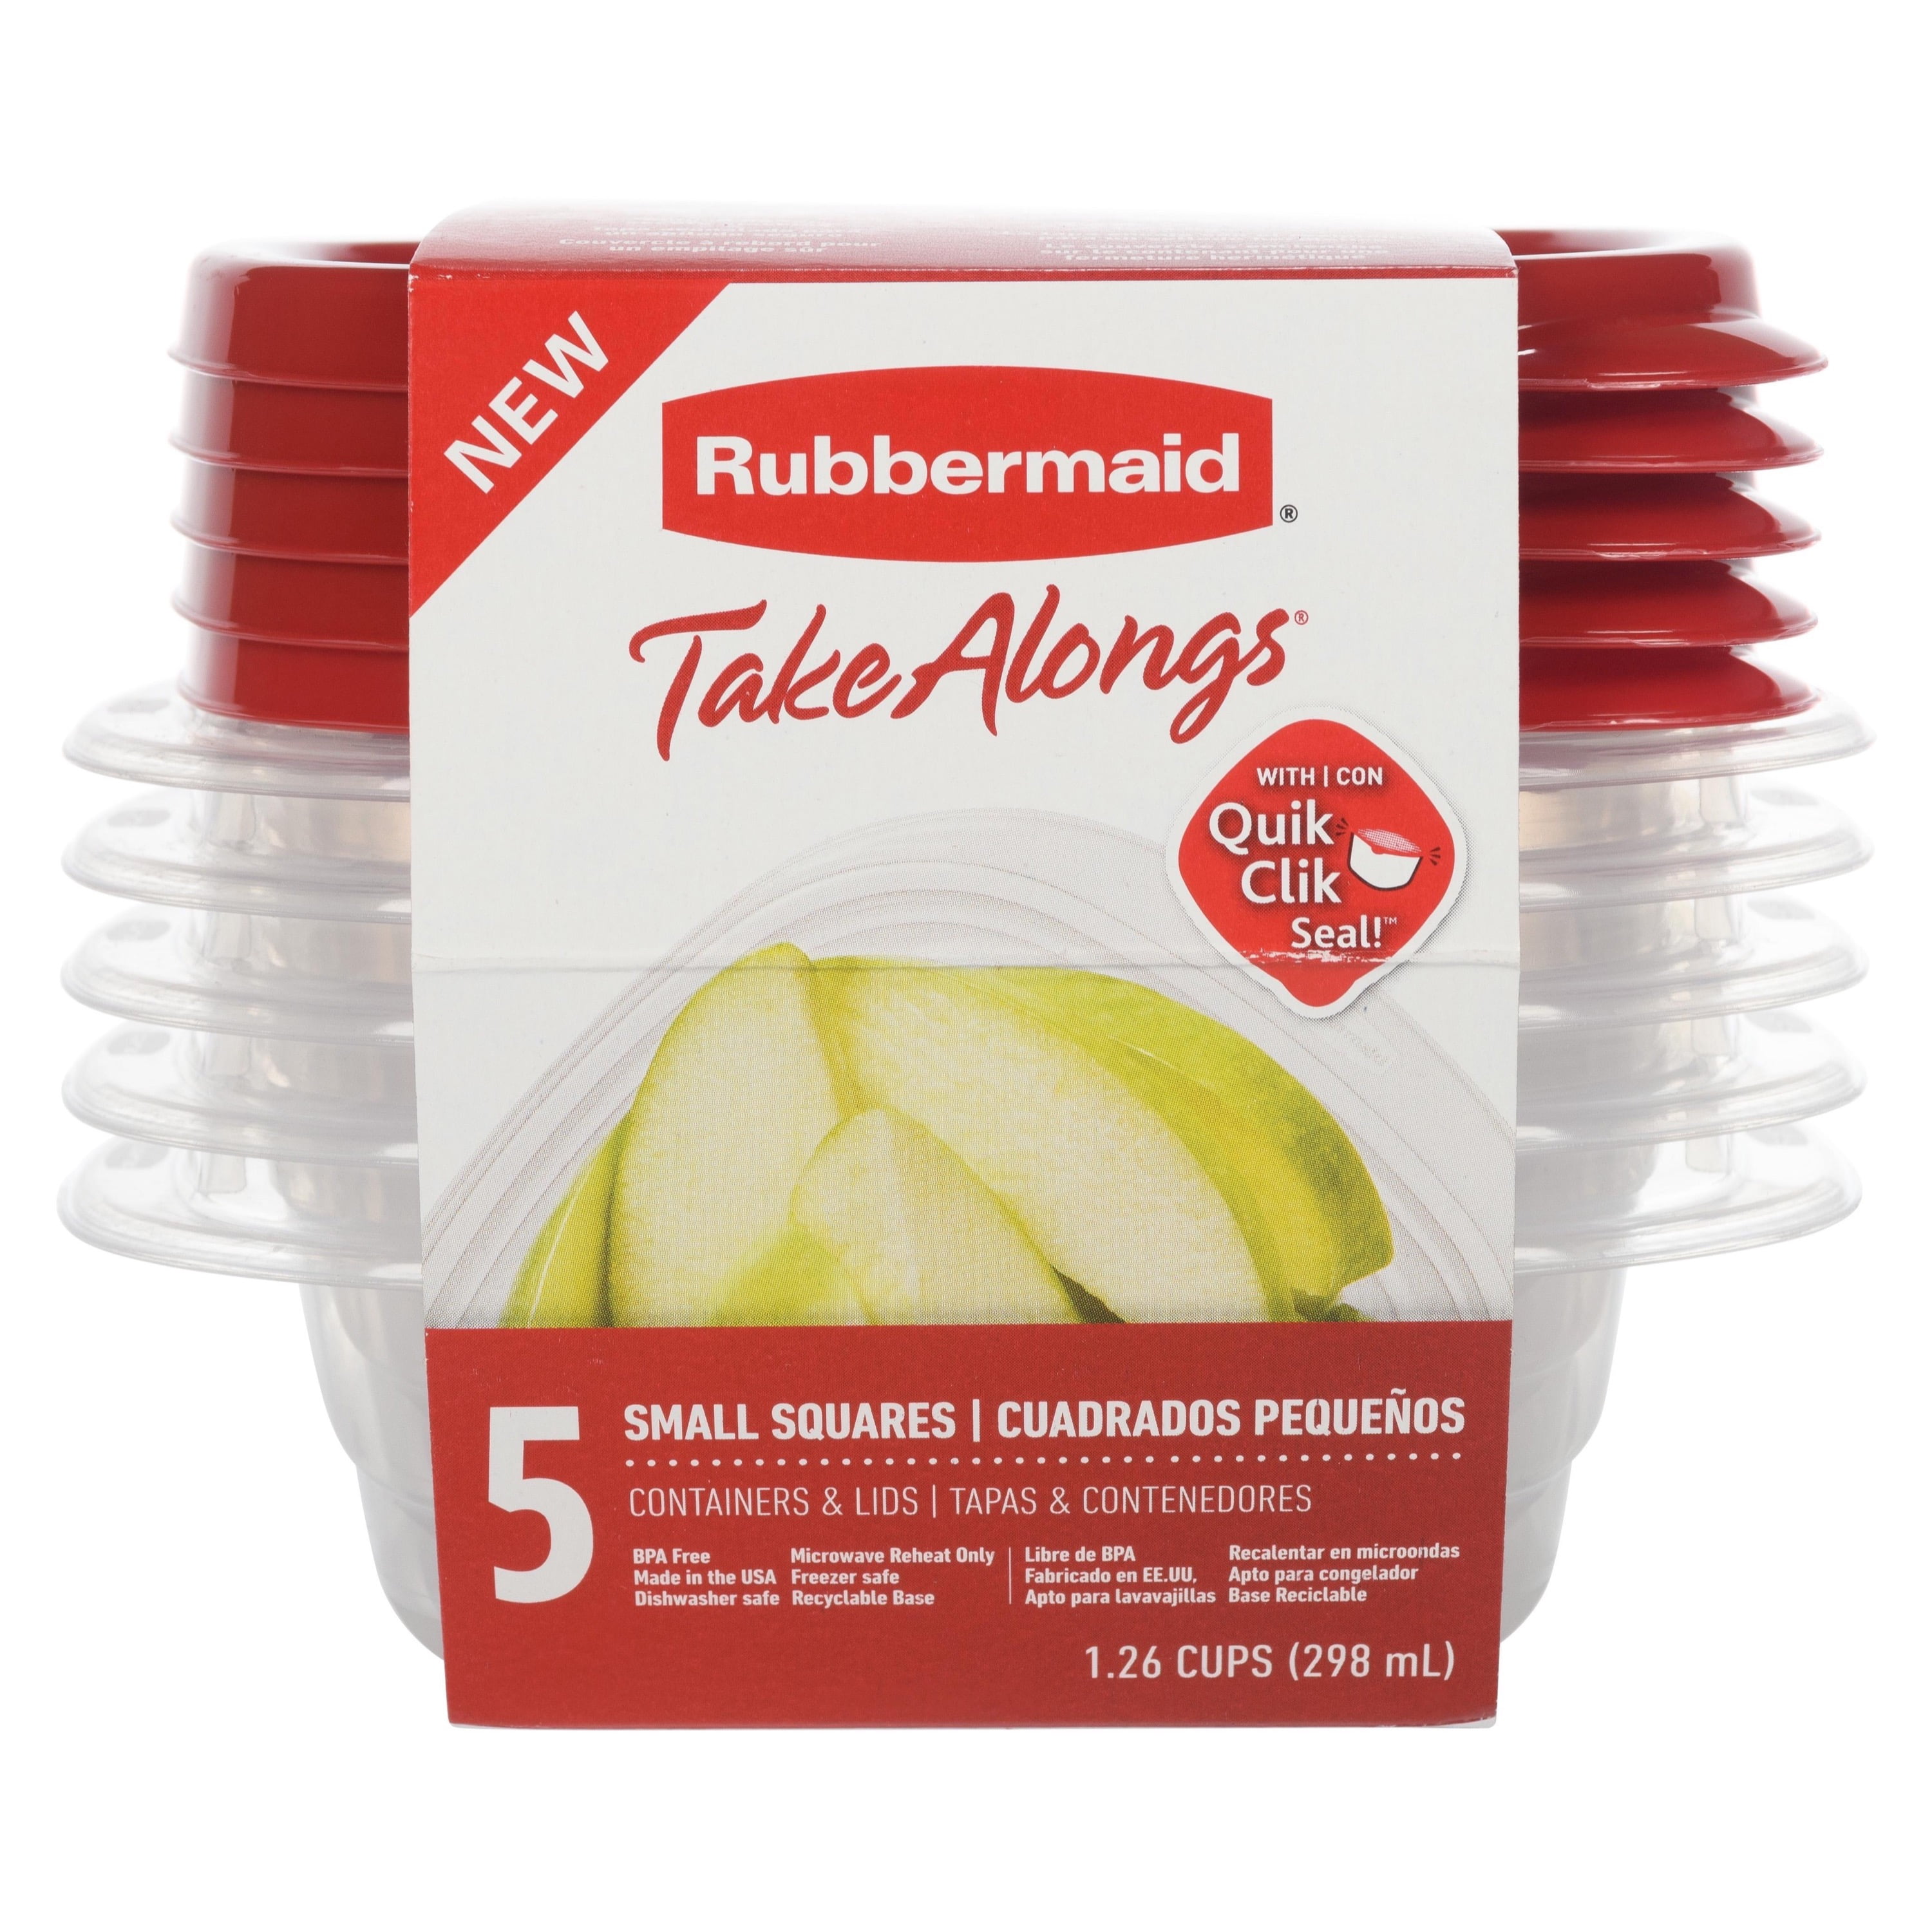 Rubbermaid TakeAlongs 1.26 Cup Food Storage Containers, Set of 5